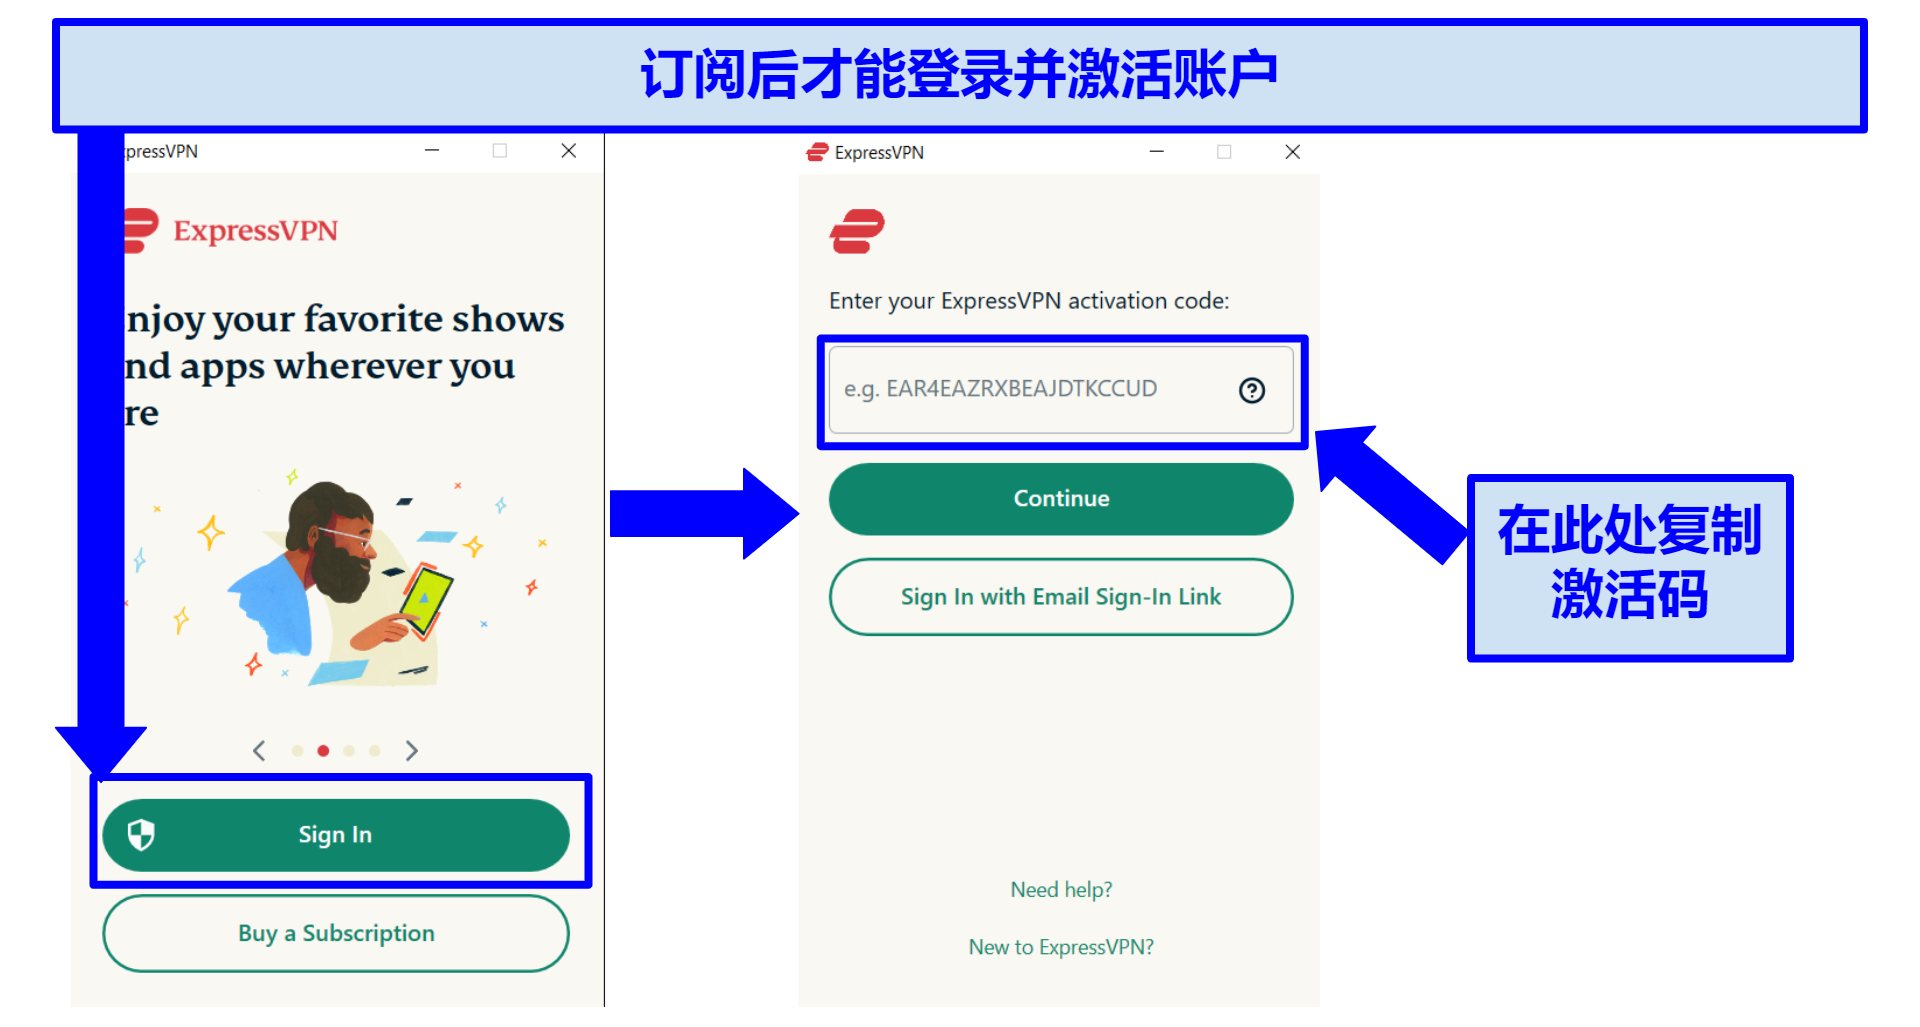 Image showing how to sign in and activate ExpressVPN with different screenshots of the VPN app.